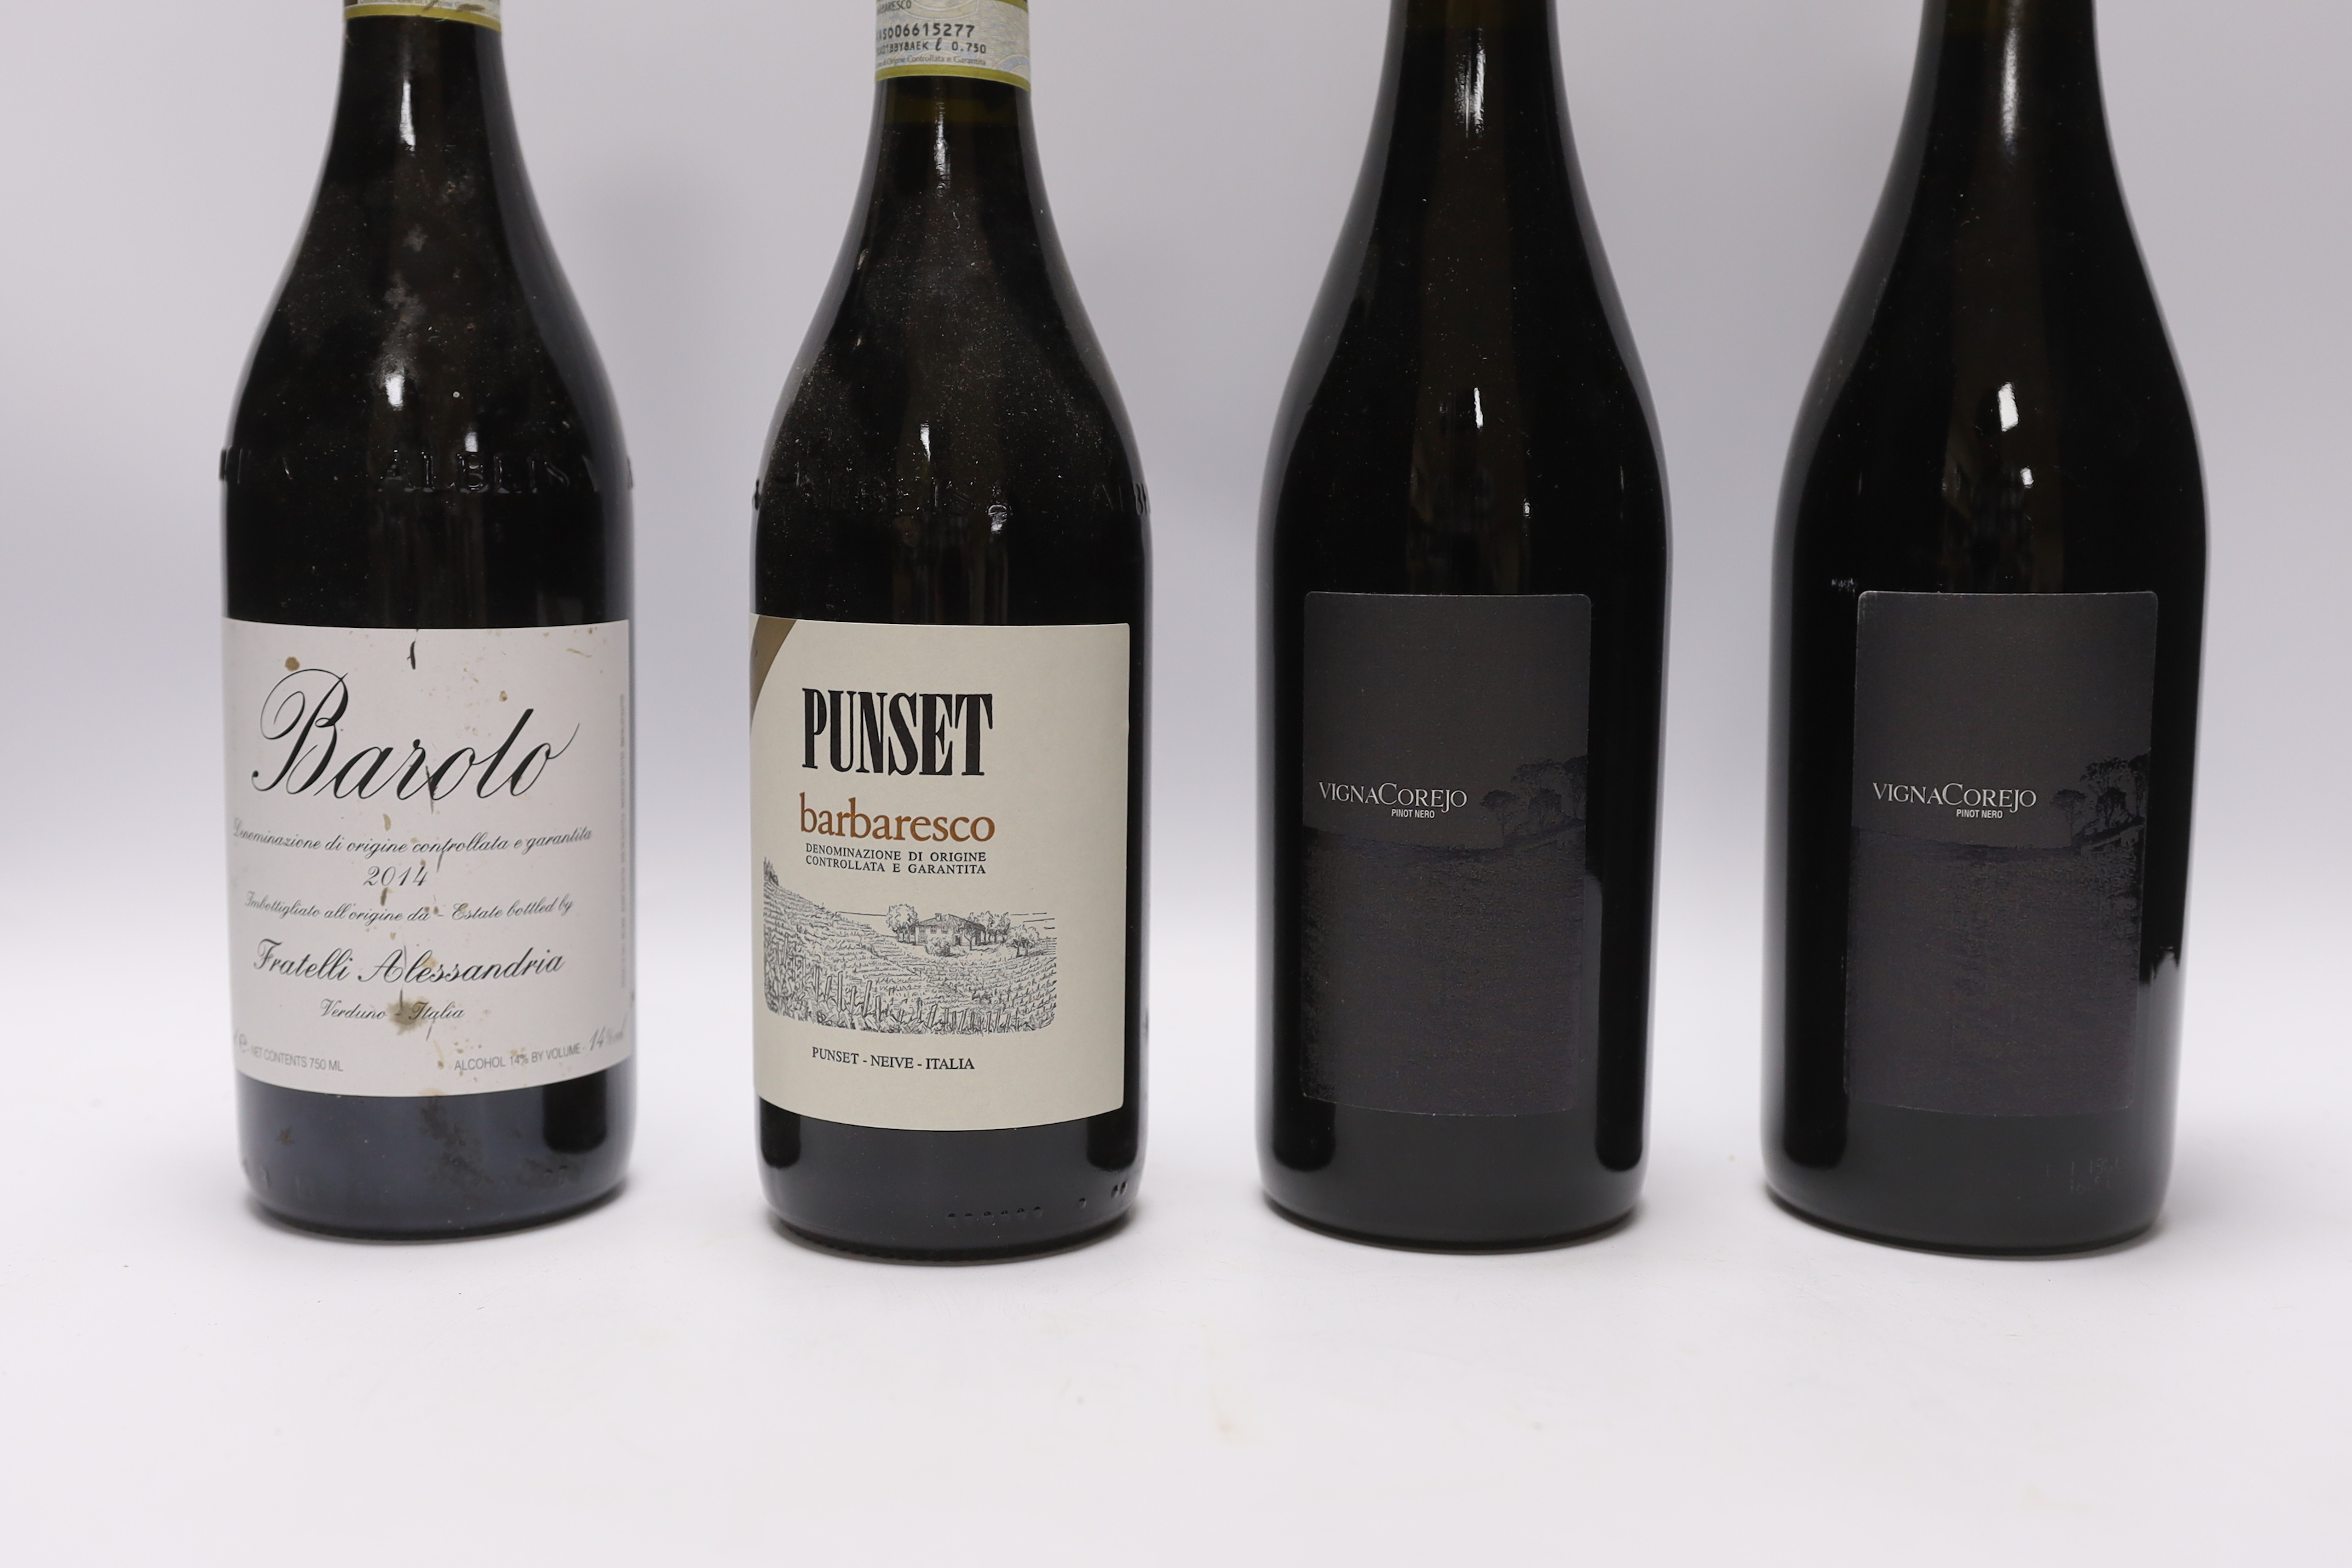 Six bottles of wine and three bottles of champagne including a bottle of 2014 Barolo, two bottles of Punset 2012 and three bottles of Vigny Corejo (Pinot)